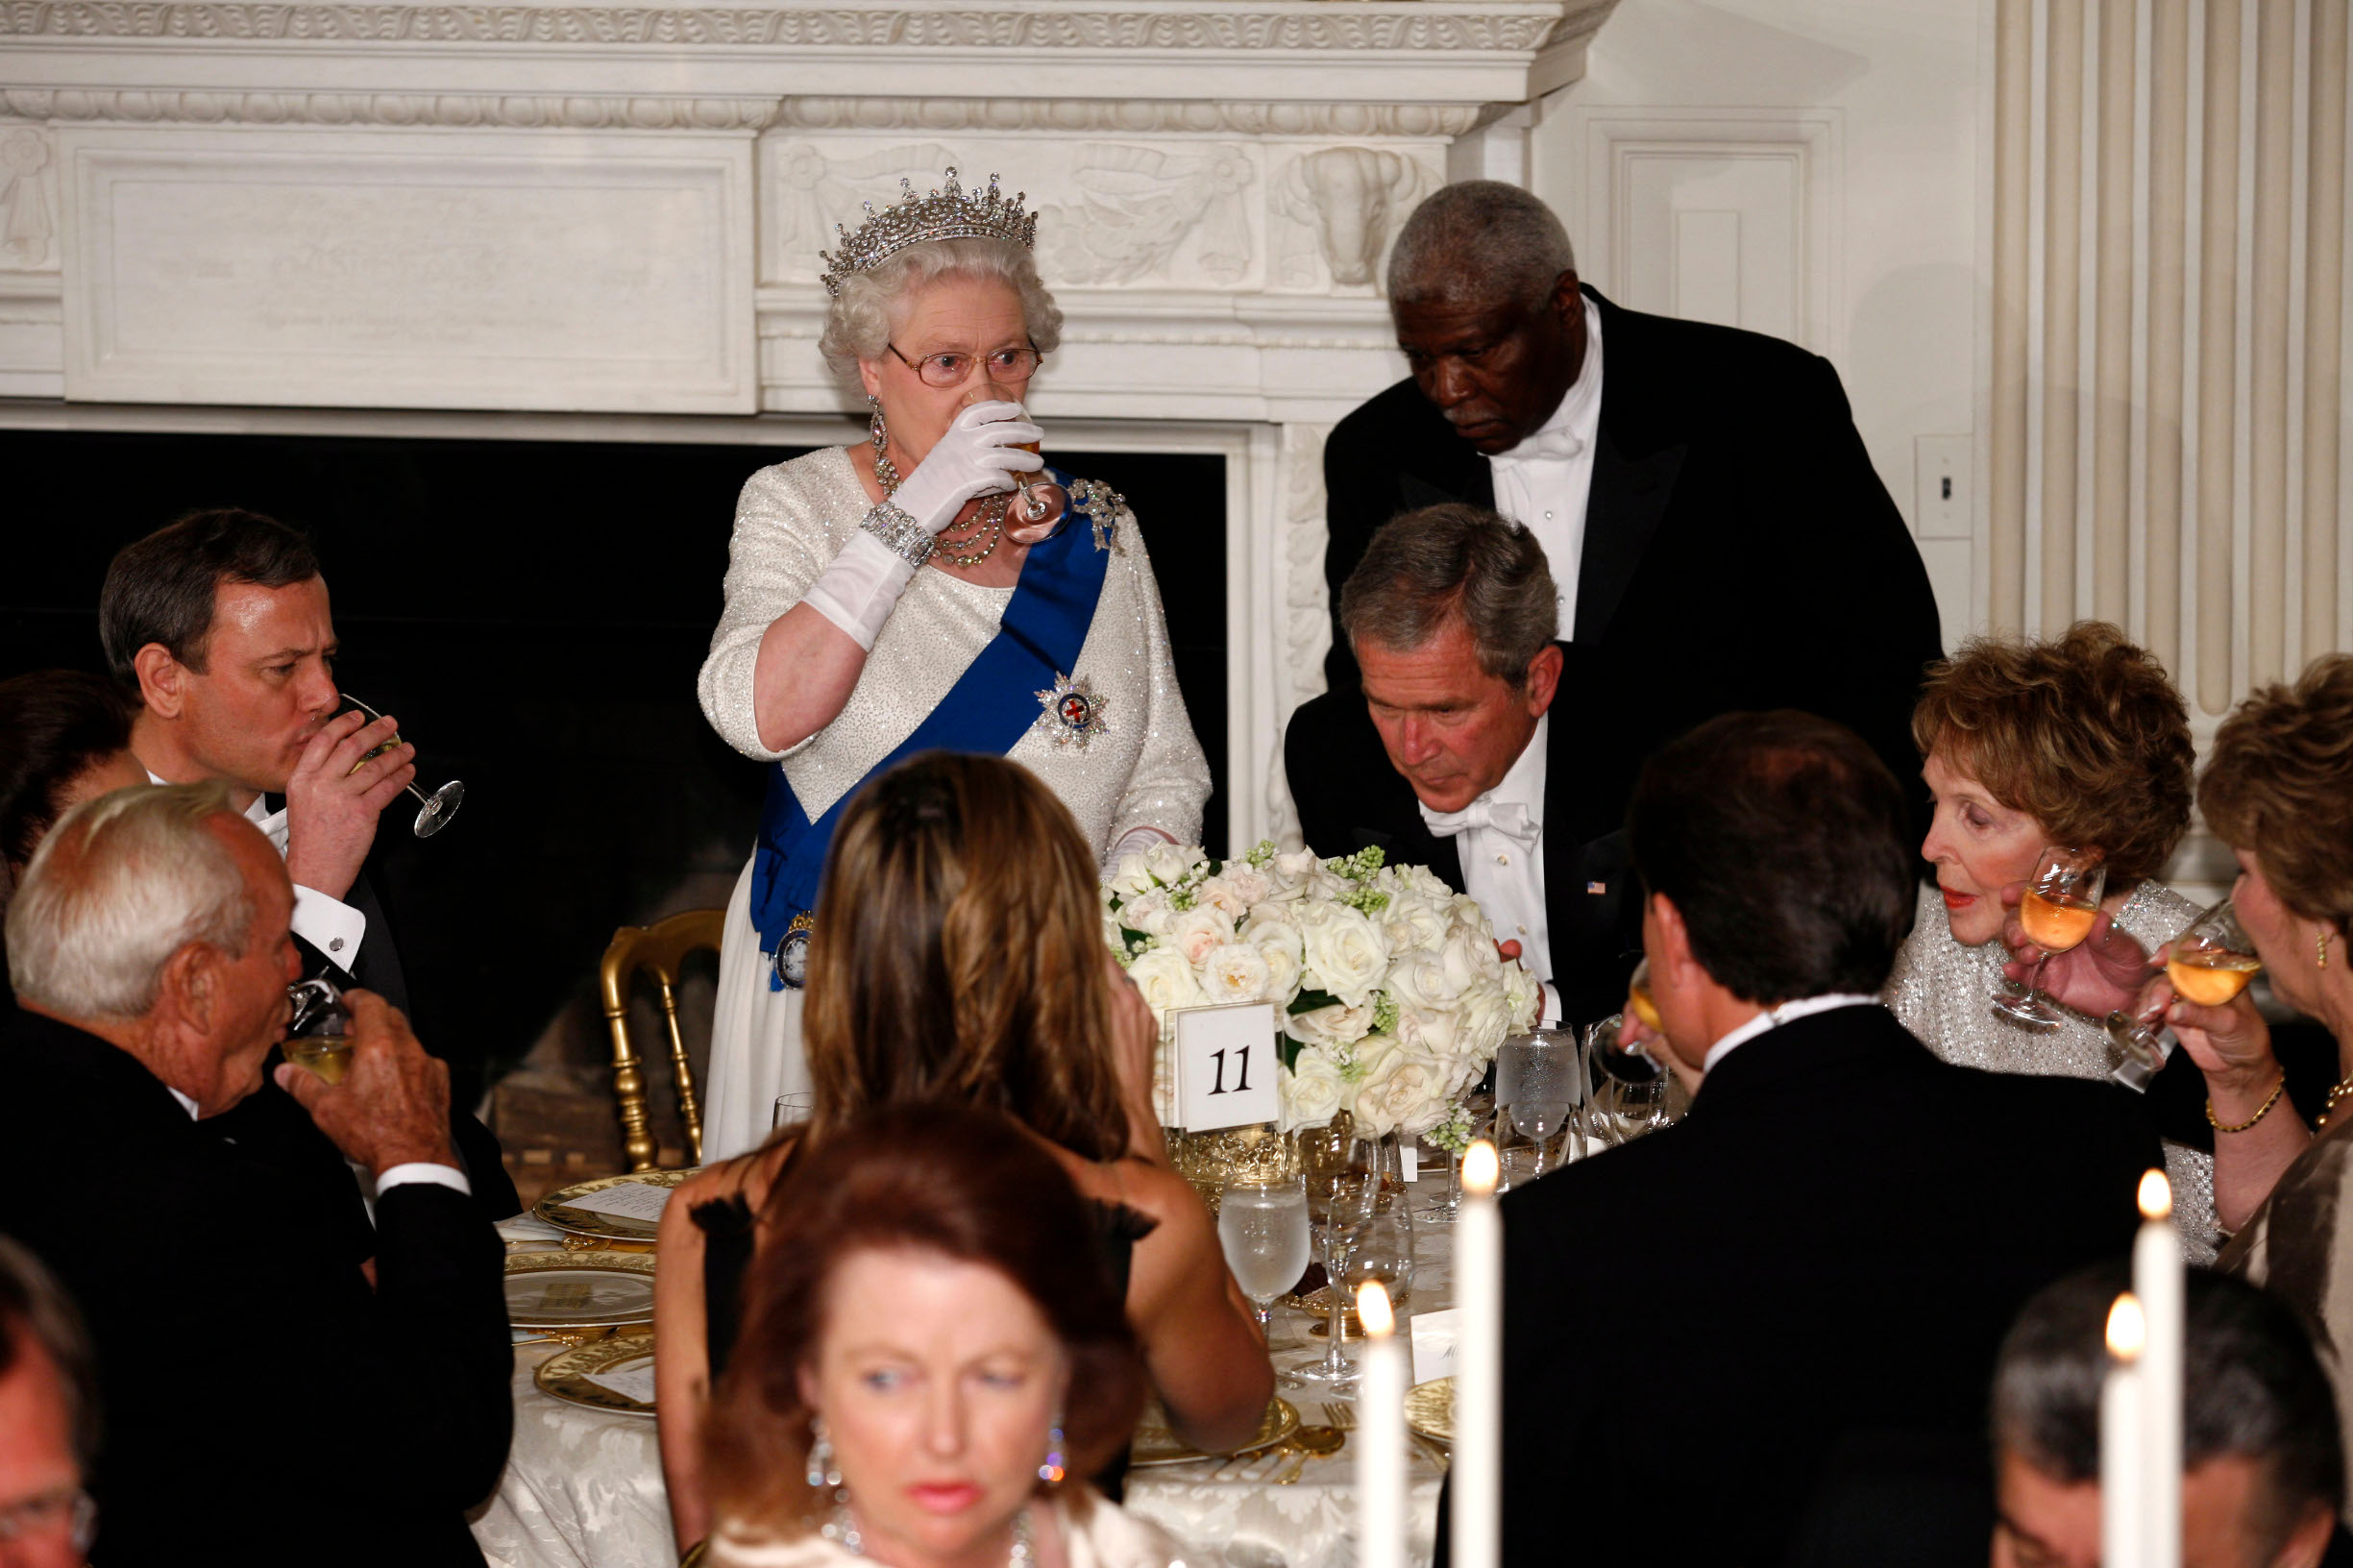 WASHINGTON - MAY 7:  (AFP OUT) Her Majesty Queen Elizabeth II offers a toast to U.S. President George W. Bush and those gathered in the State Dining Room during a formal white-tie state dinner at the White House May 7, 2007 in Washington, DC. Queen Elizabeth II and Prince Phillip, the Duke of Edinburgh are on a six day trip to the United States.  (Photo by Martin H. Simon-Pool/Getty Images)